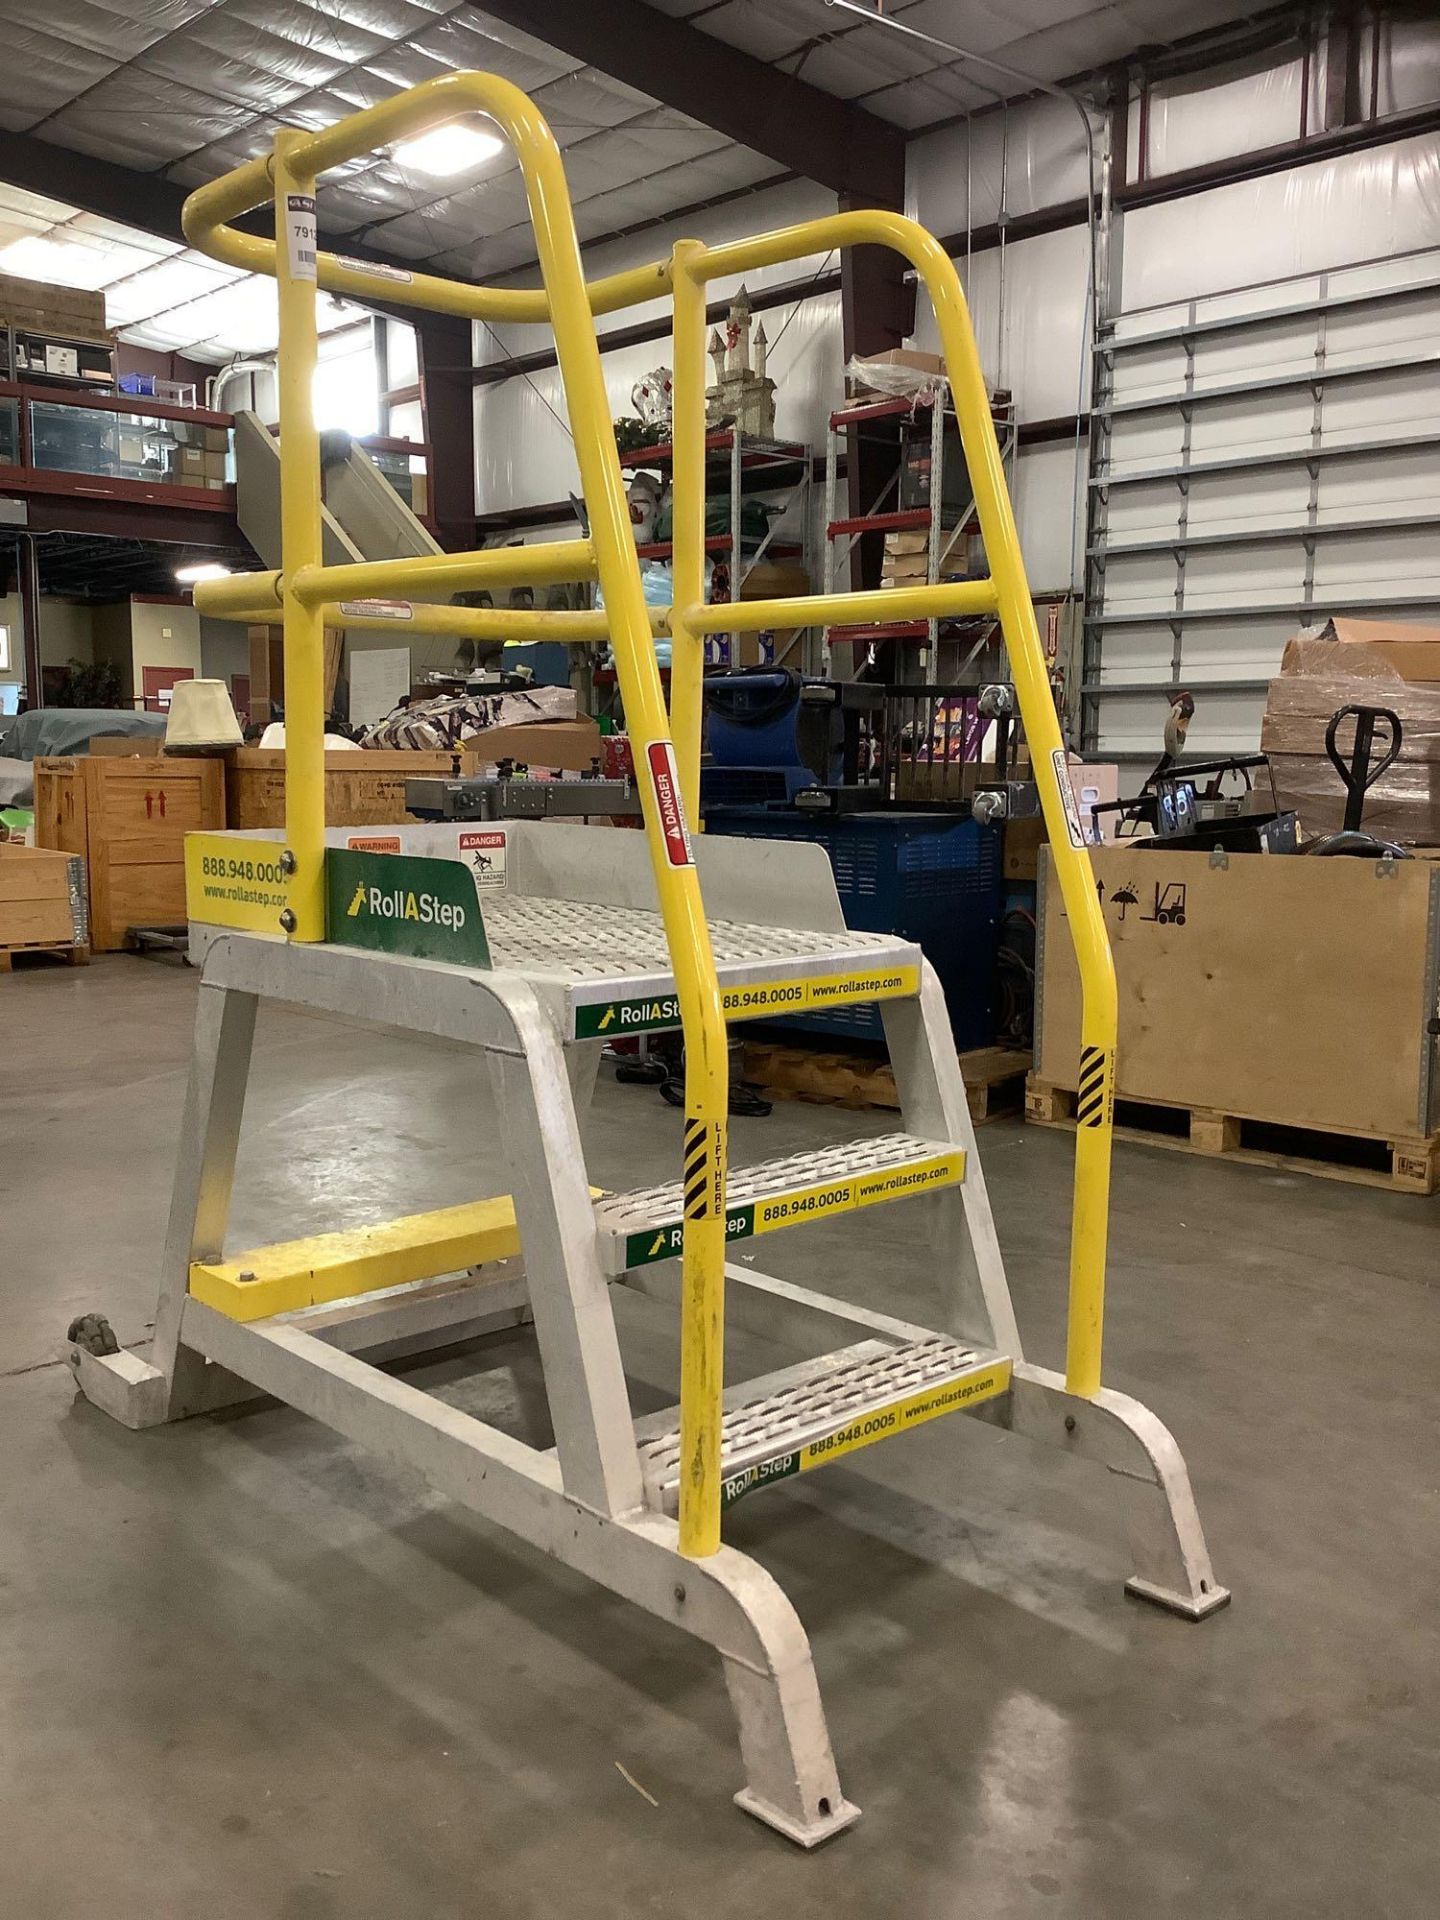 ROLLASTEP TR TILT N ROLL SERIES INDUSTRIAL LADDER, ALUMINUM CONSTRUCTION, APPROX 70in TALL x 32in WI